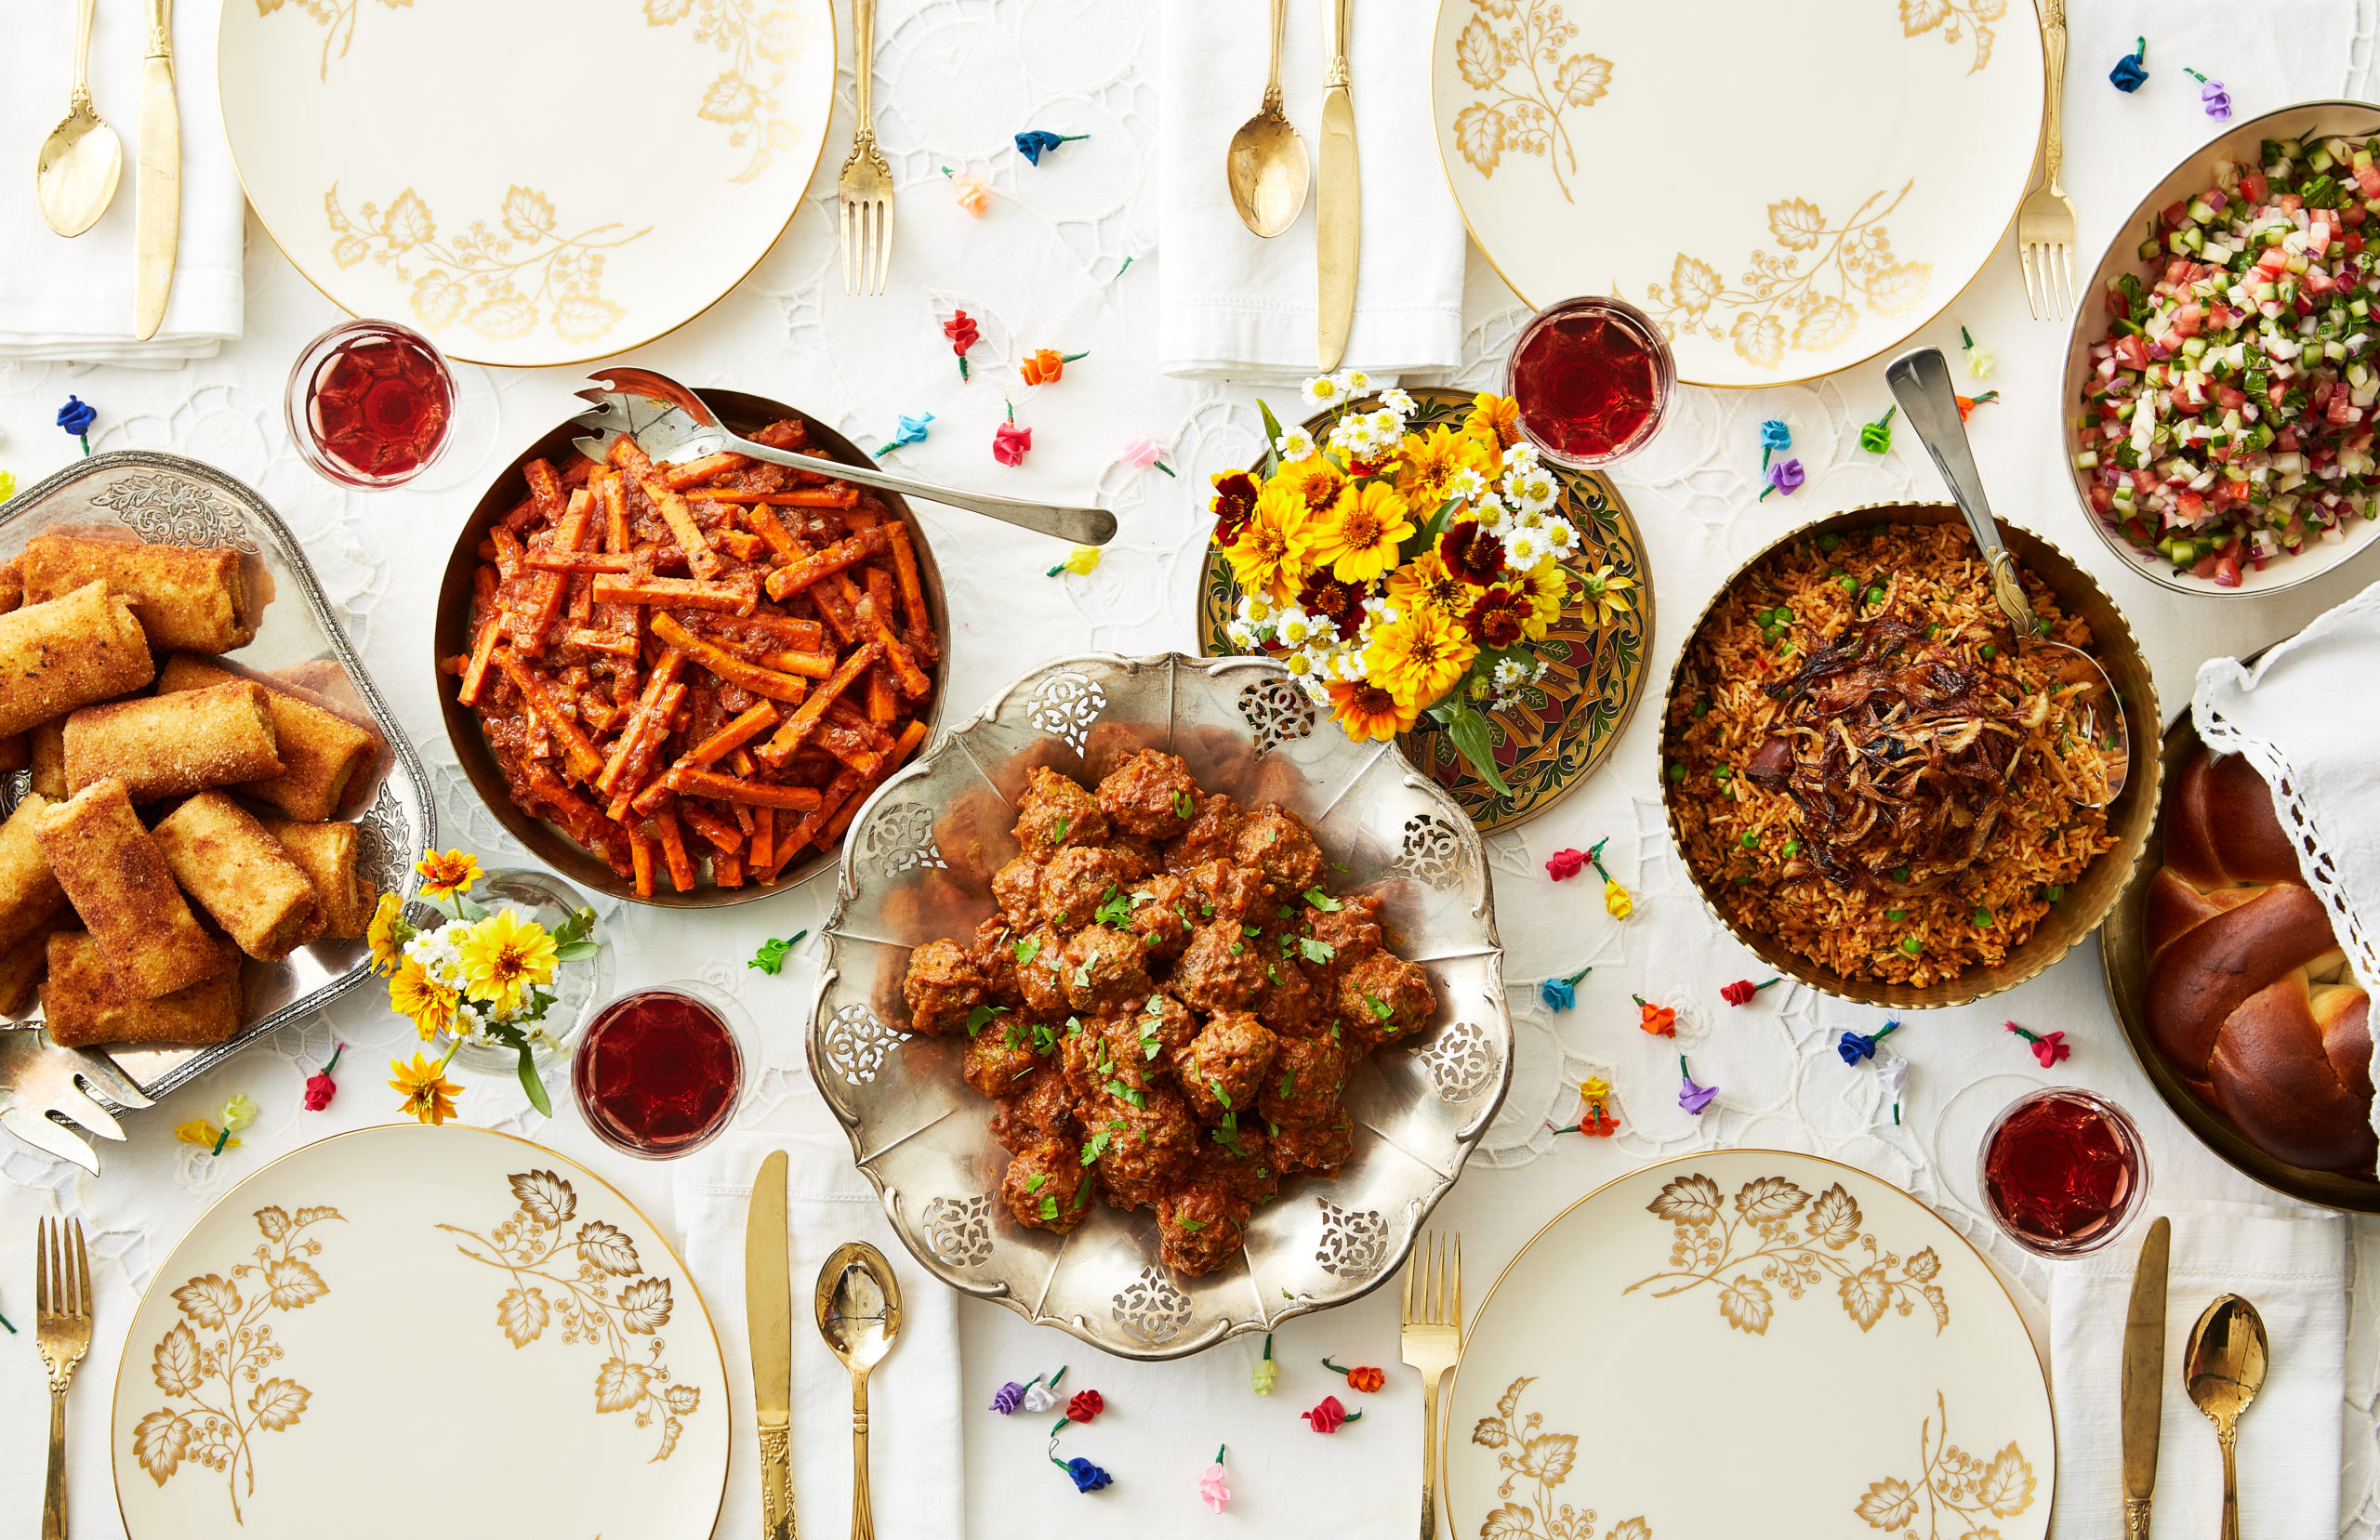 Colorful spread of Rosh Hashanah recipes from the Baghdadi Jewish community of India